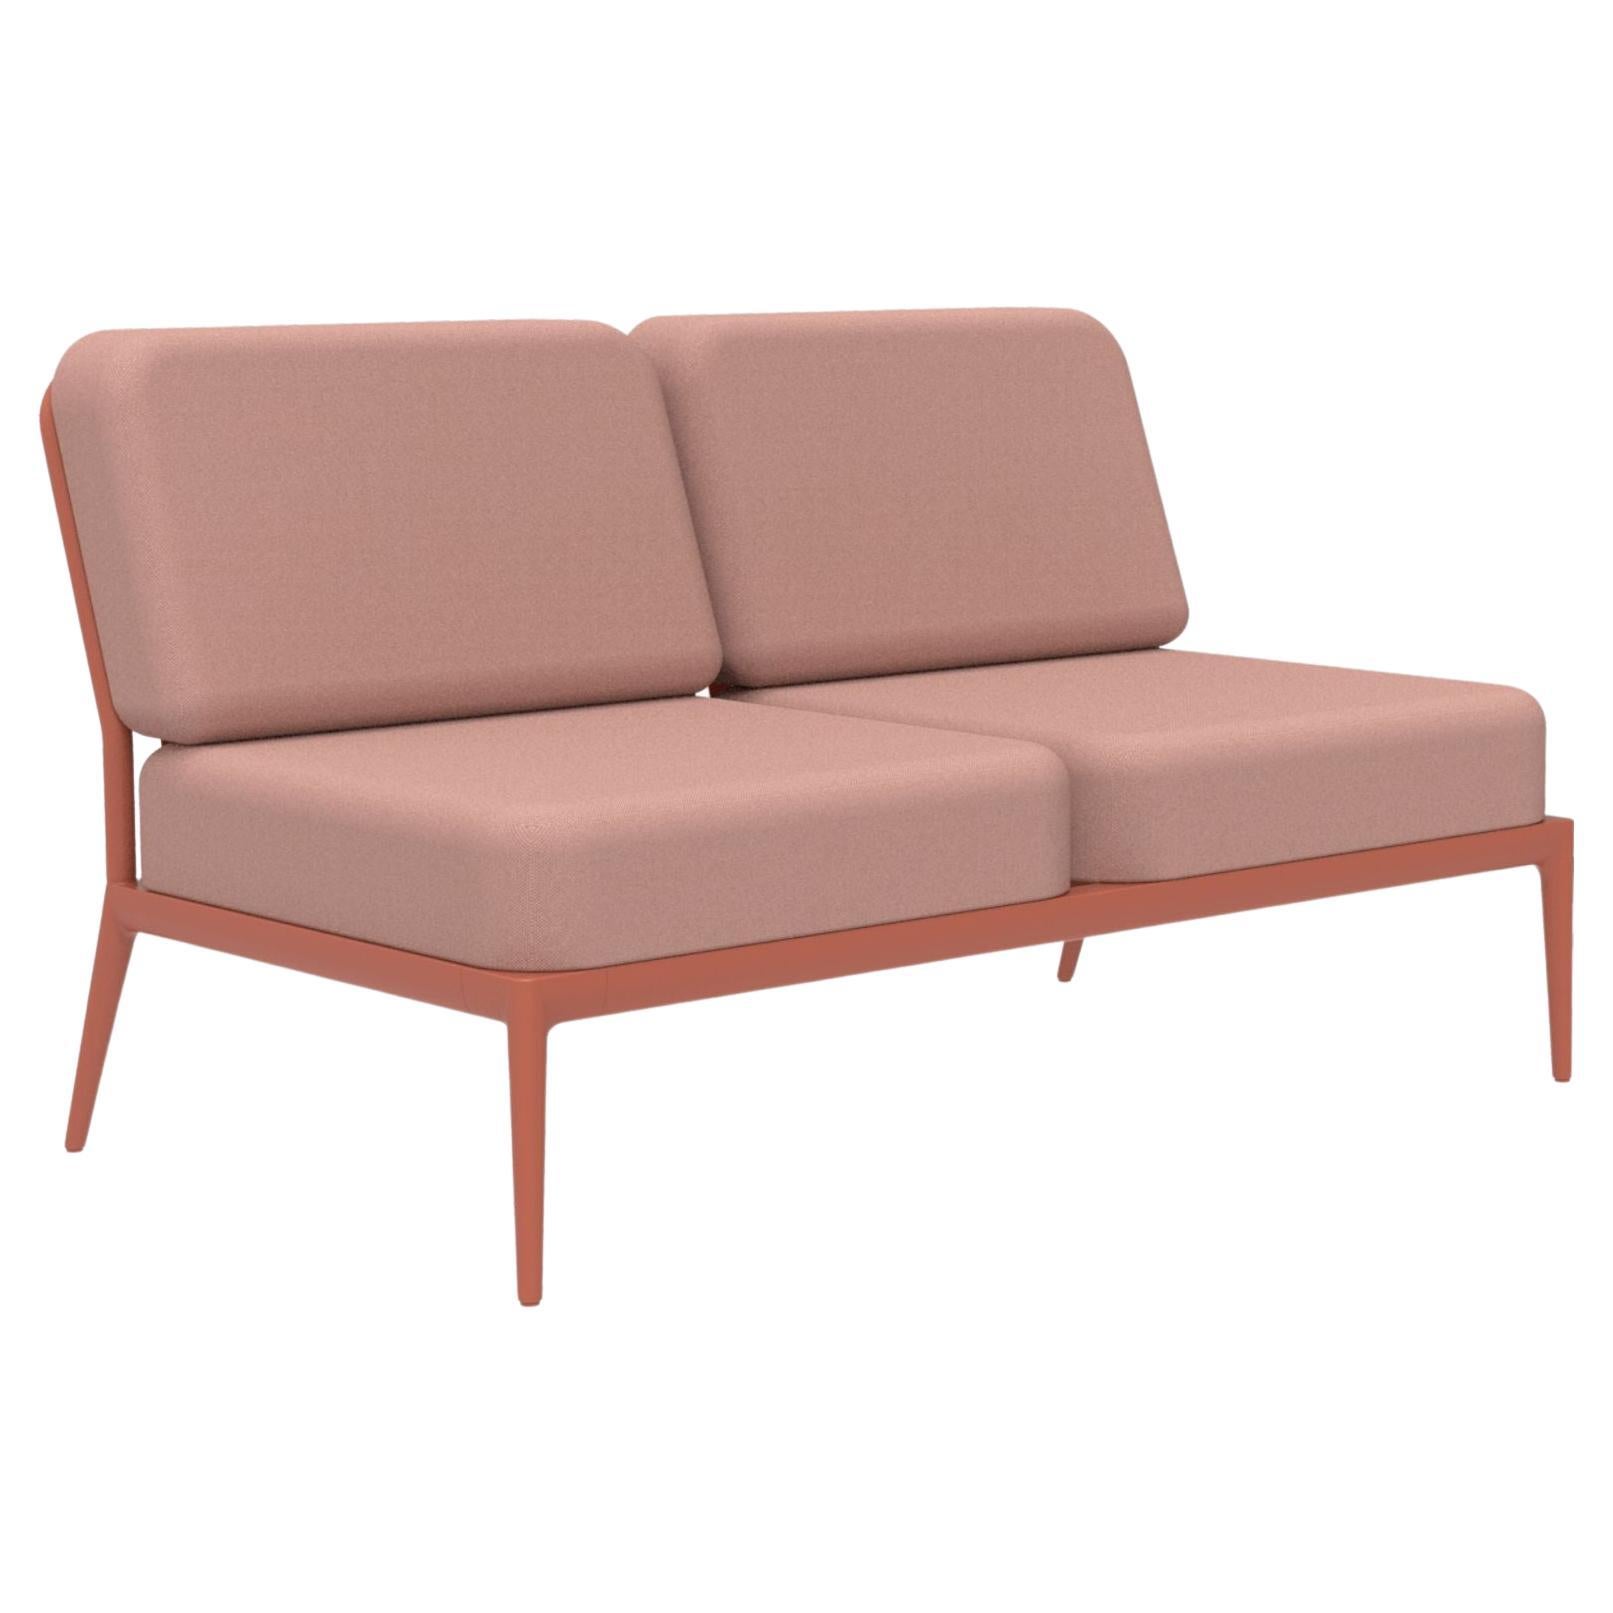 Ribbons Salmon Double Central Modular Sofa by Mowee